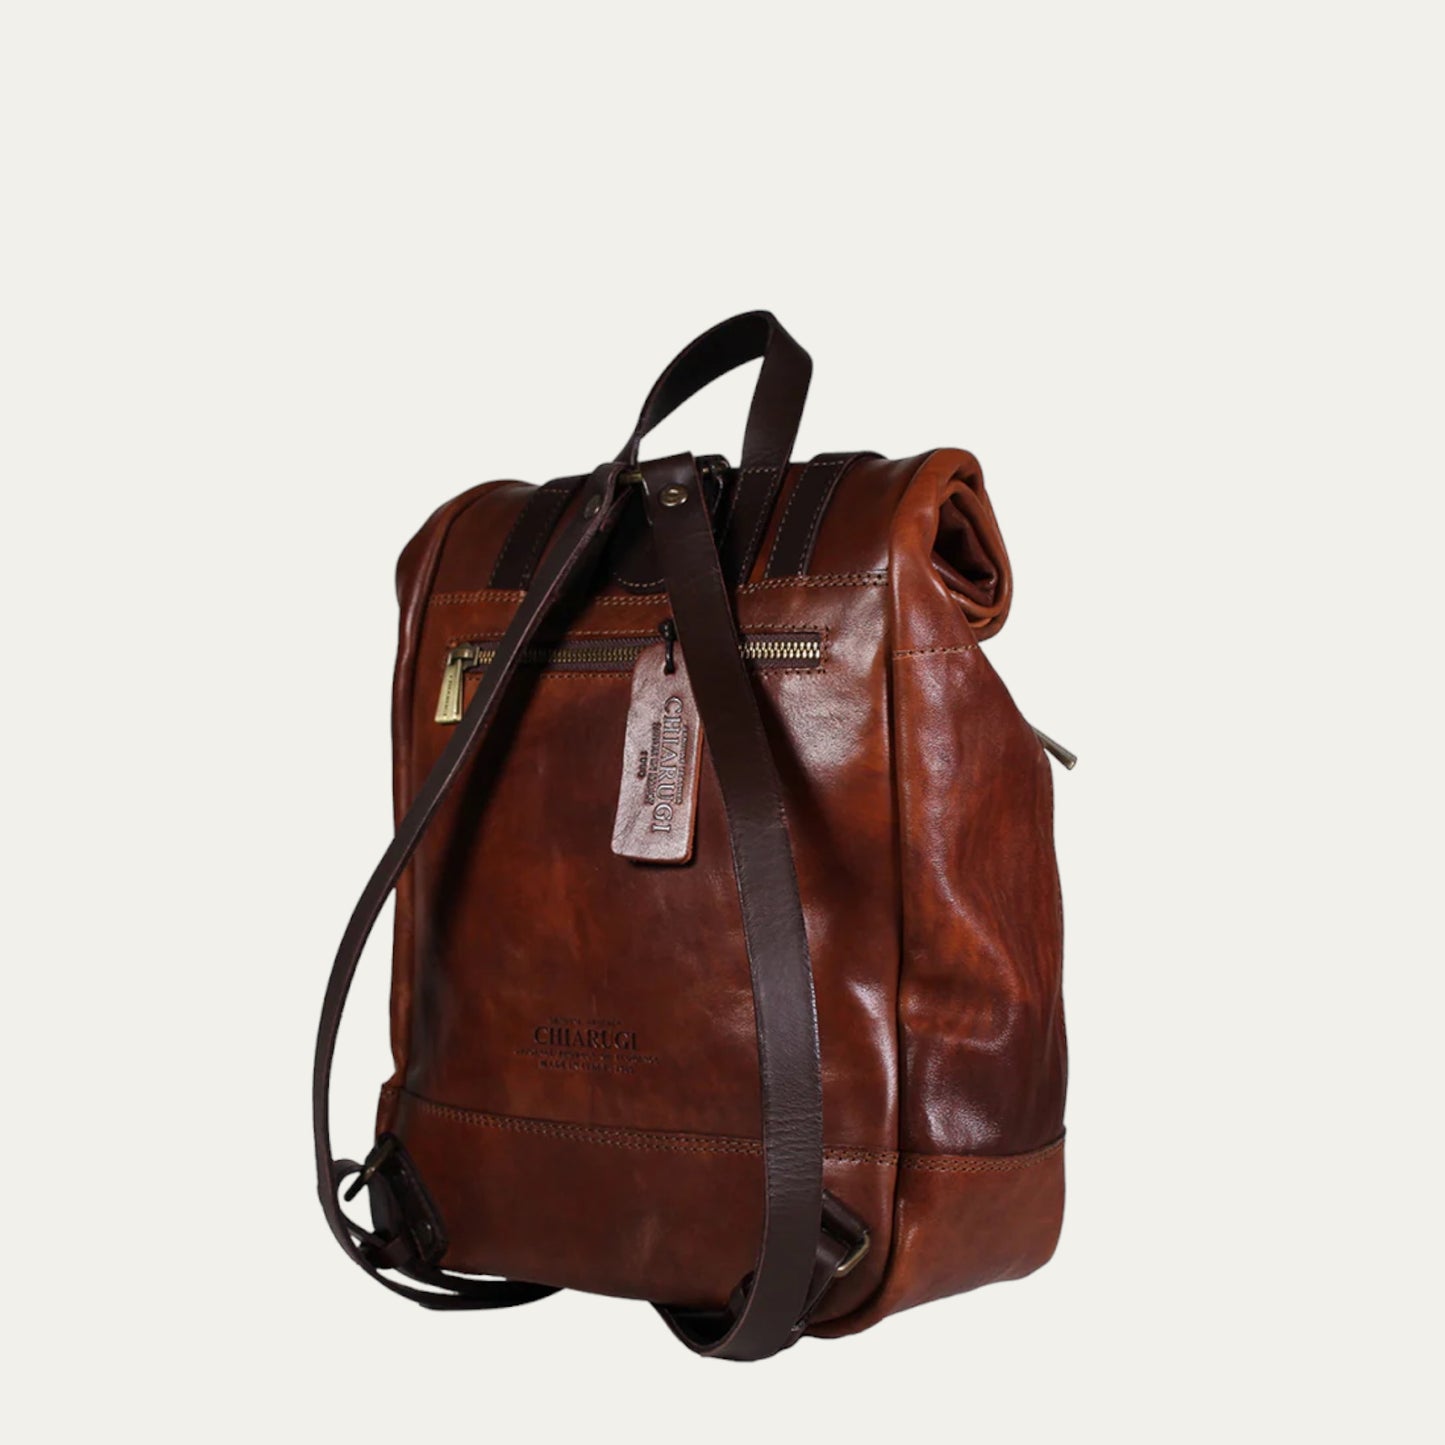 SKYE SMALL - Roll On Top Backpack